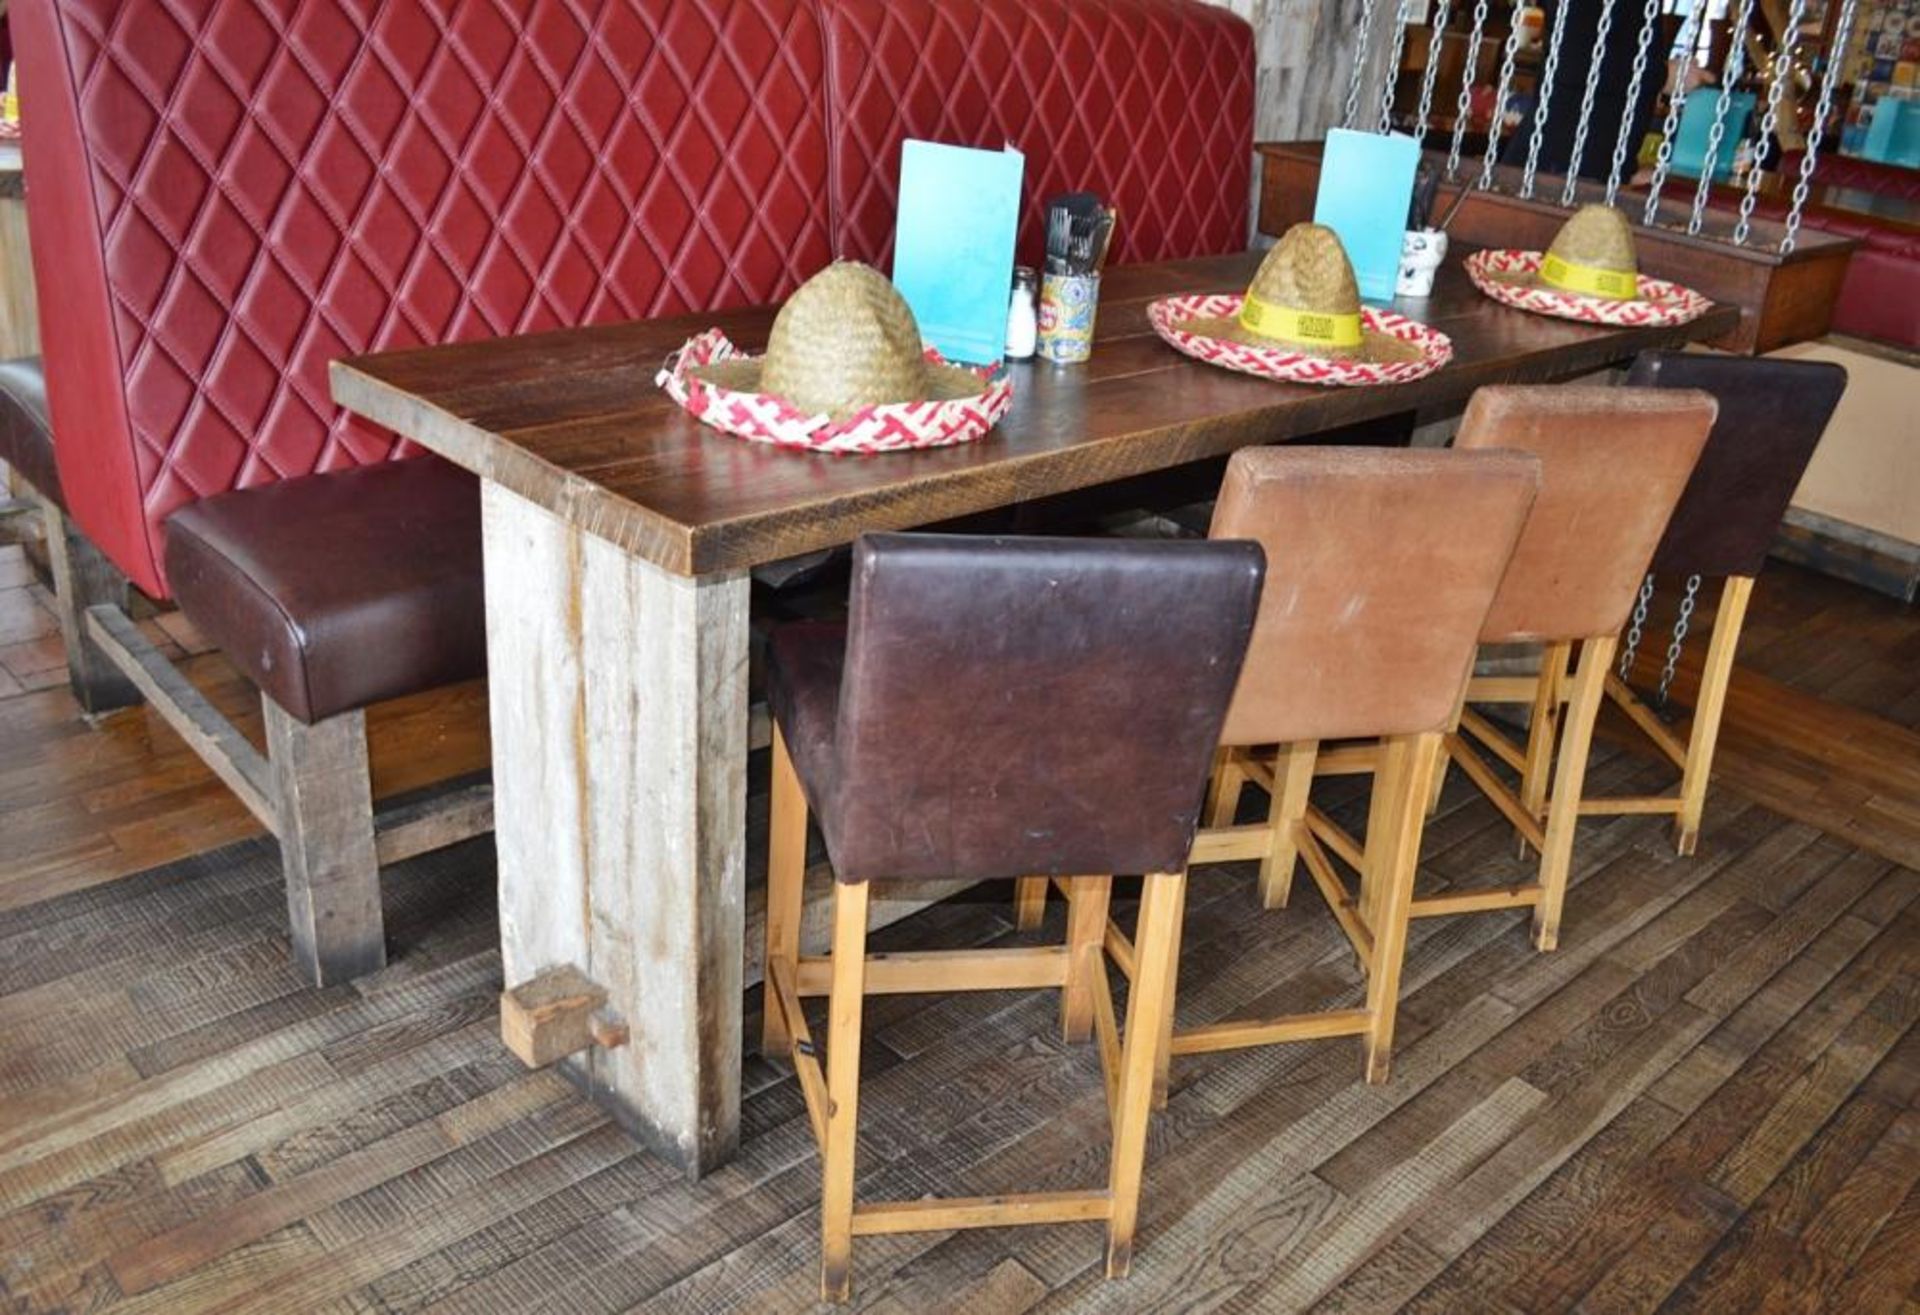 8 x Wooden Bar Stools With Faux Leather Seats in Various Colours - CL363 - Location: Stevenage SG1 - Image 2 of 5